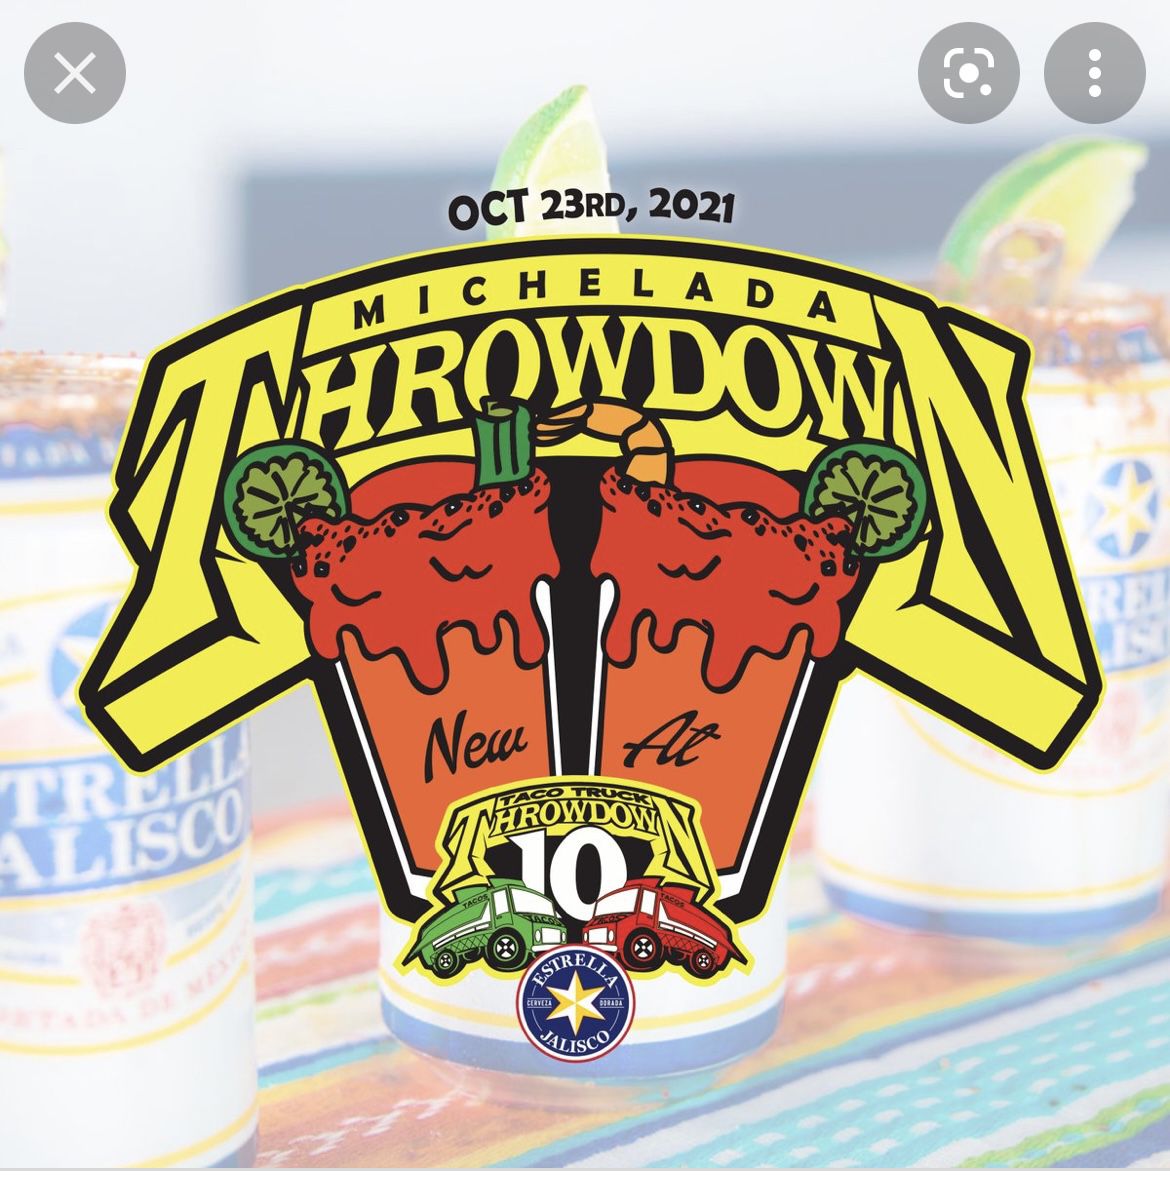 Michelada Throw Down Tickets For today!!! 